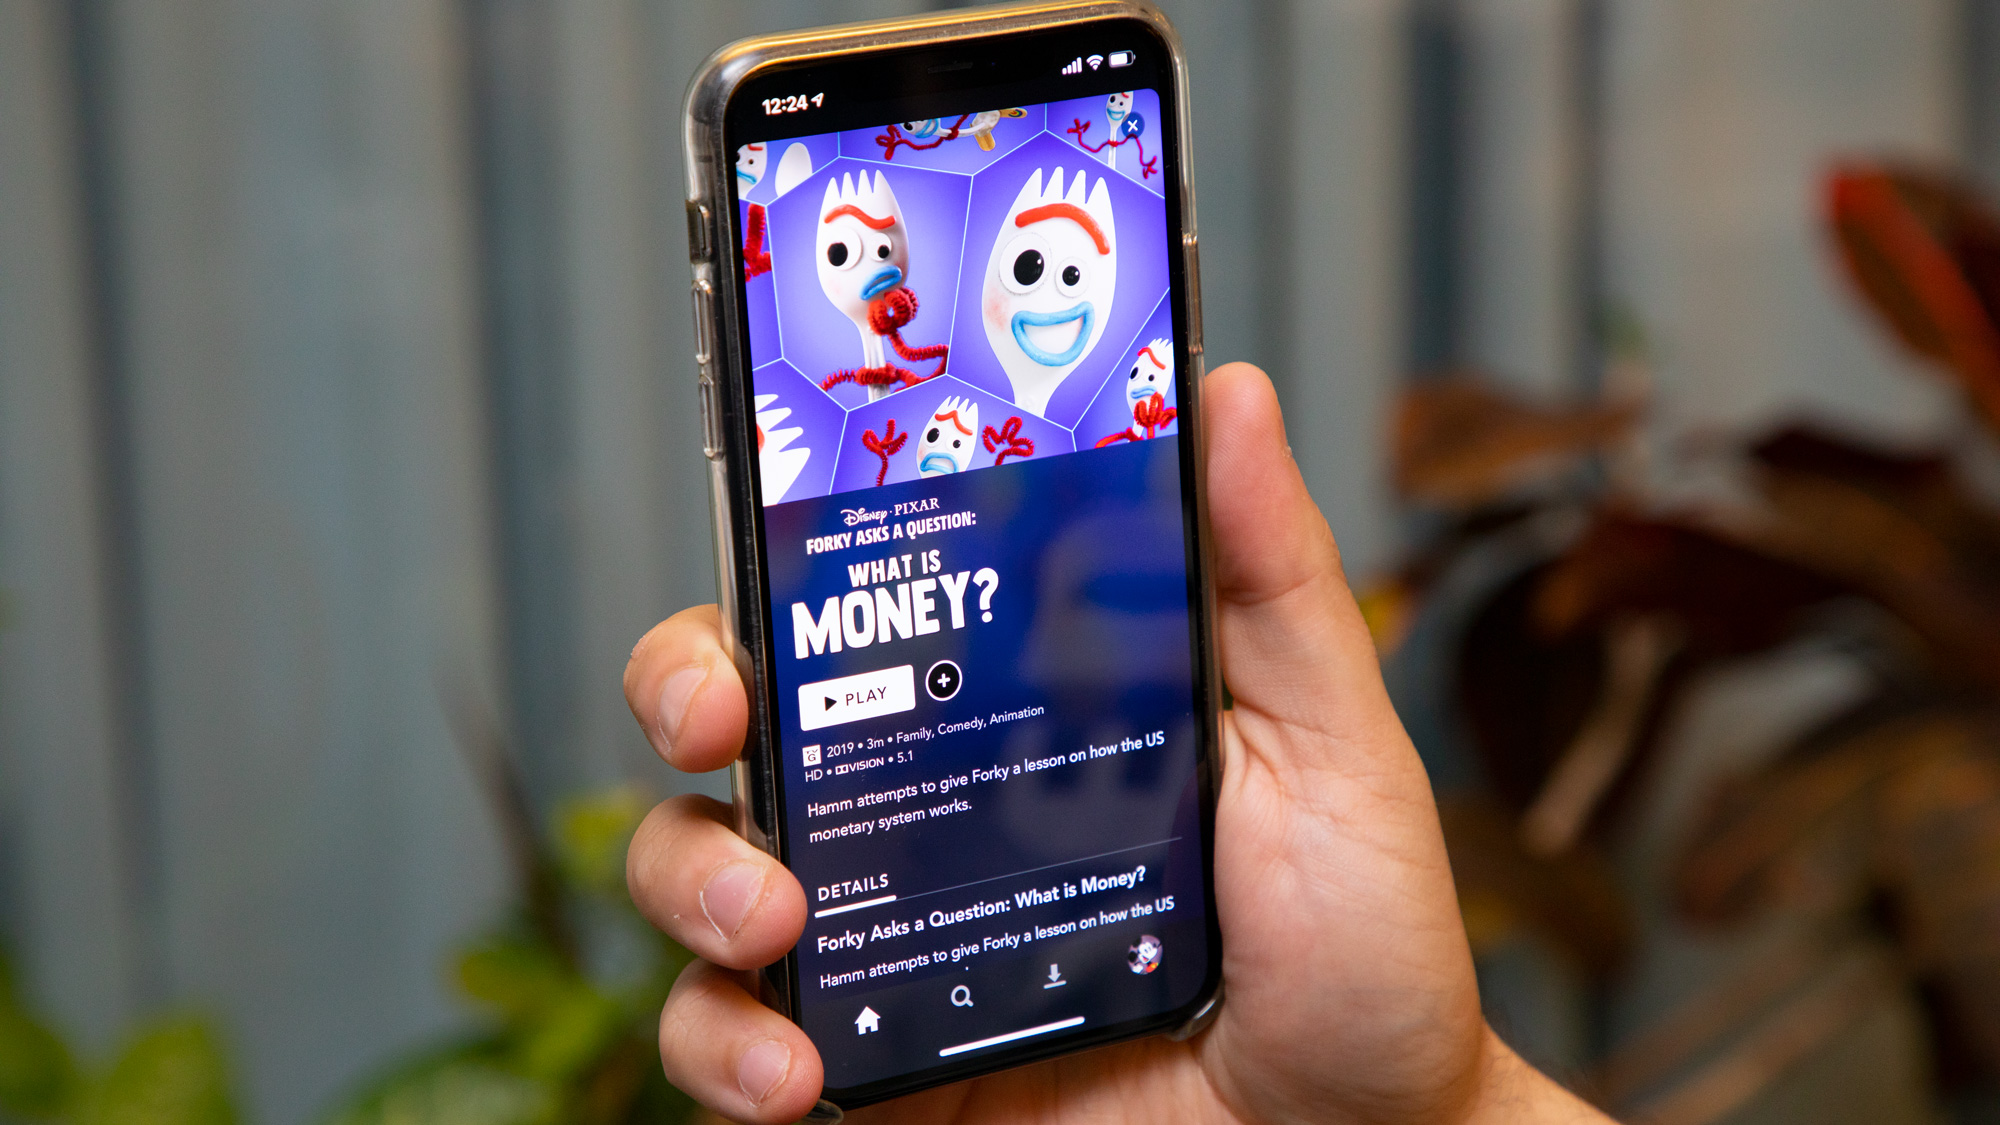 Disney Plus Forky learns about money